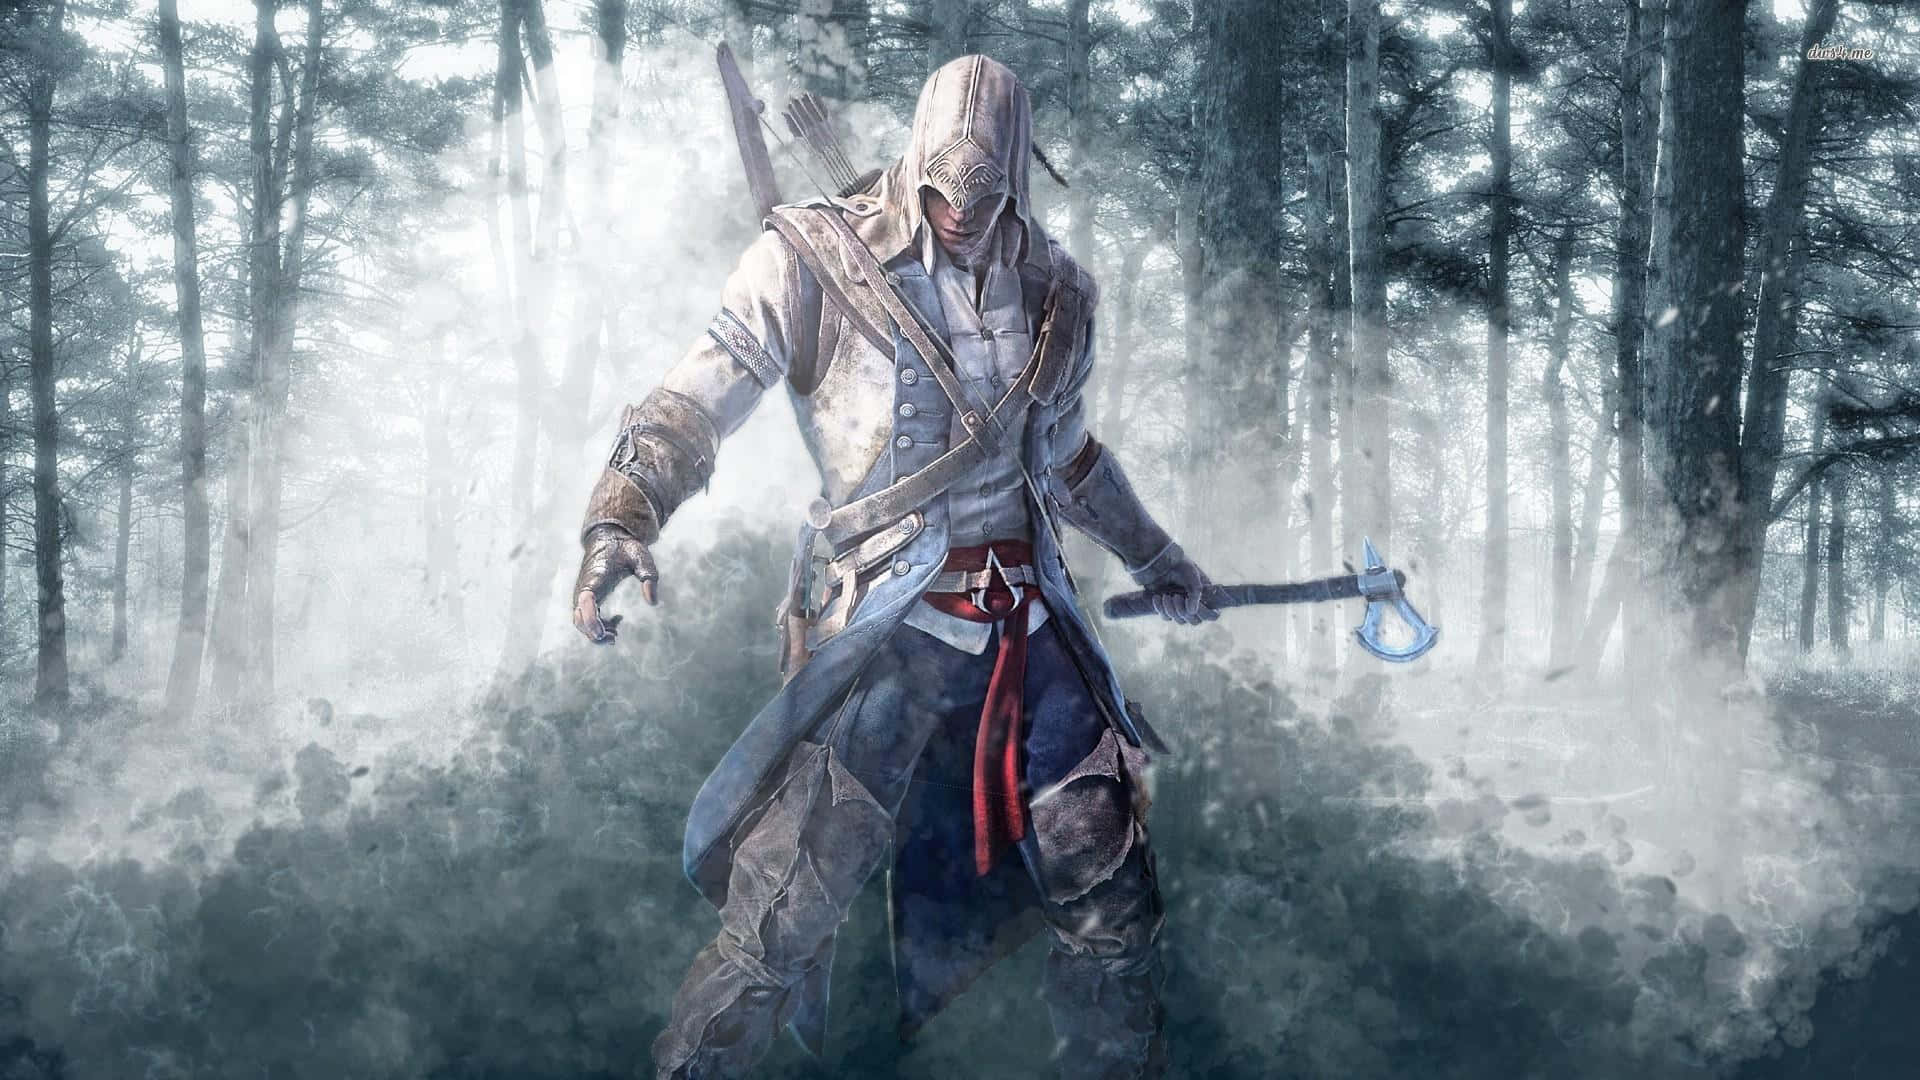 Connor Kenway, Assassin's Creed III protagonist, in action Wallpaper